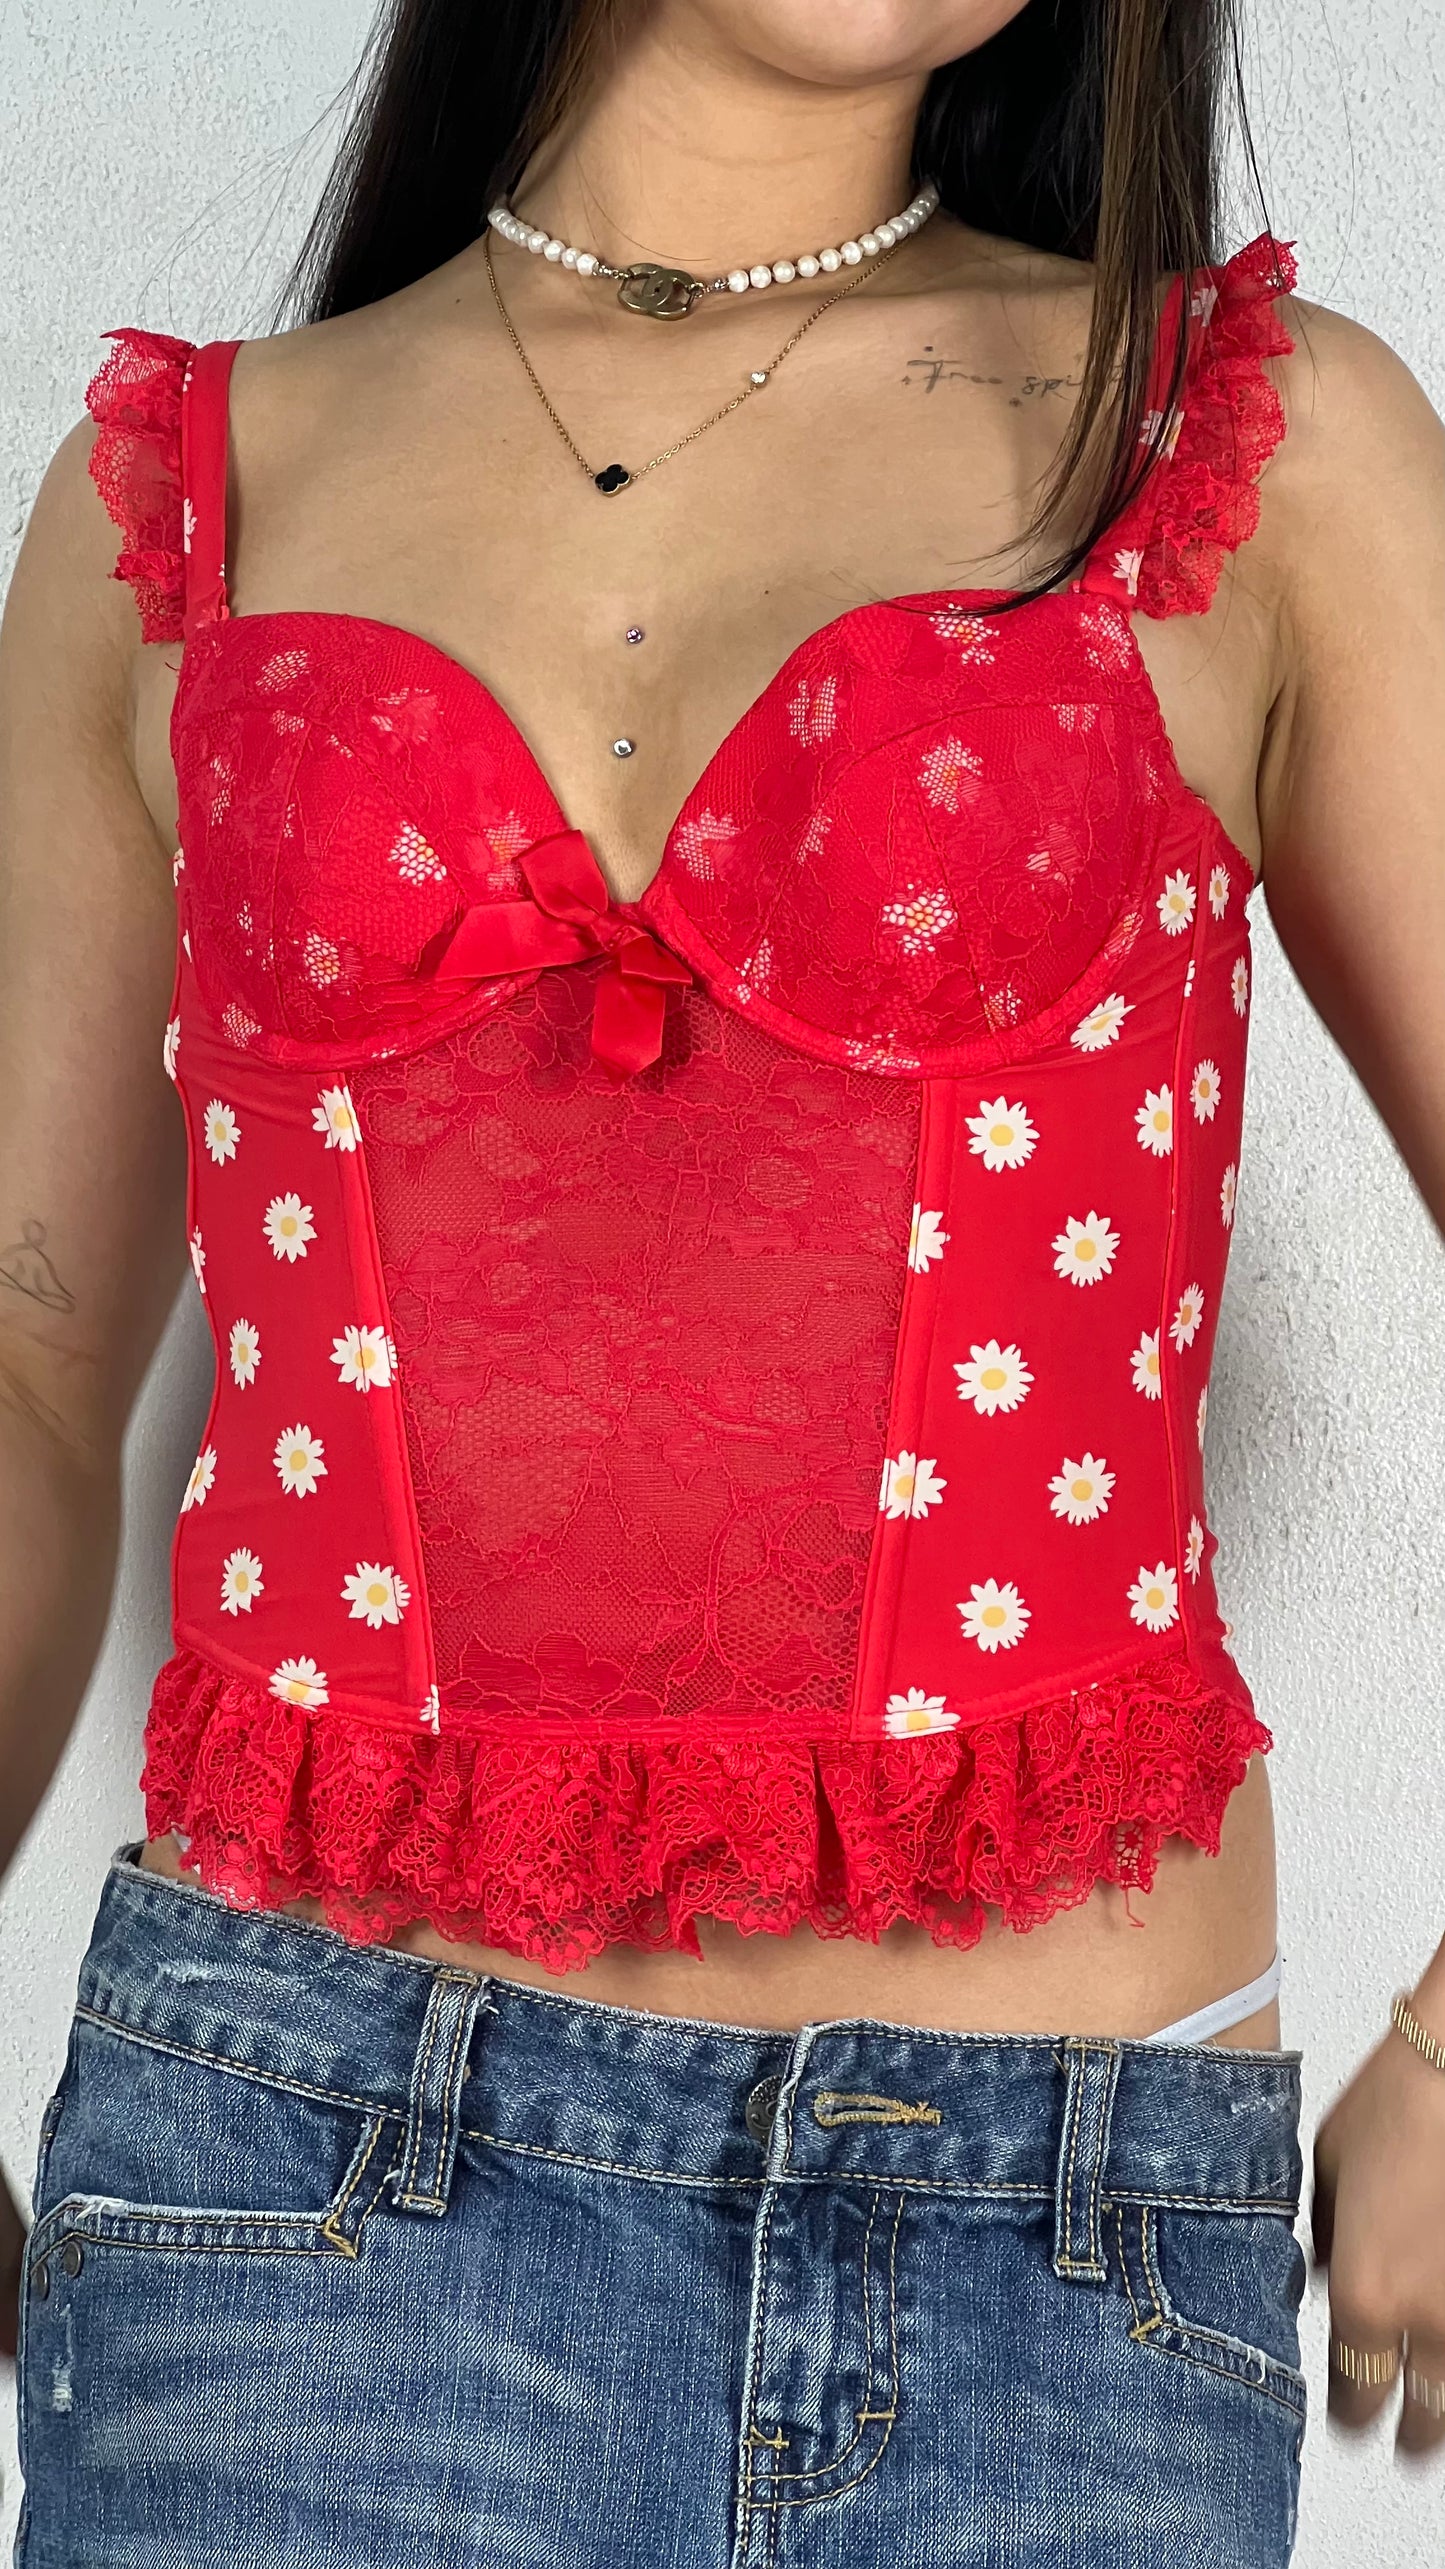 Red lace daisy corset